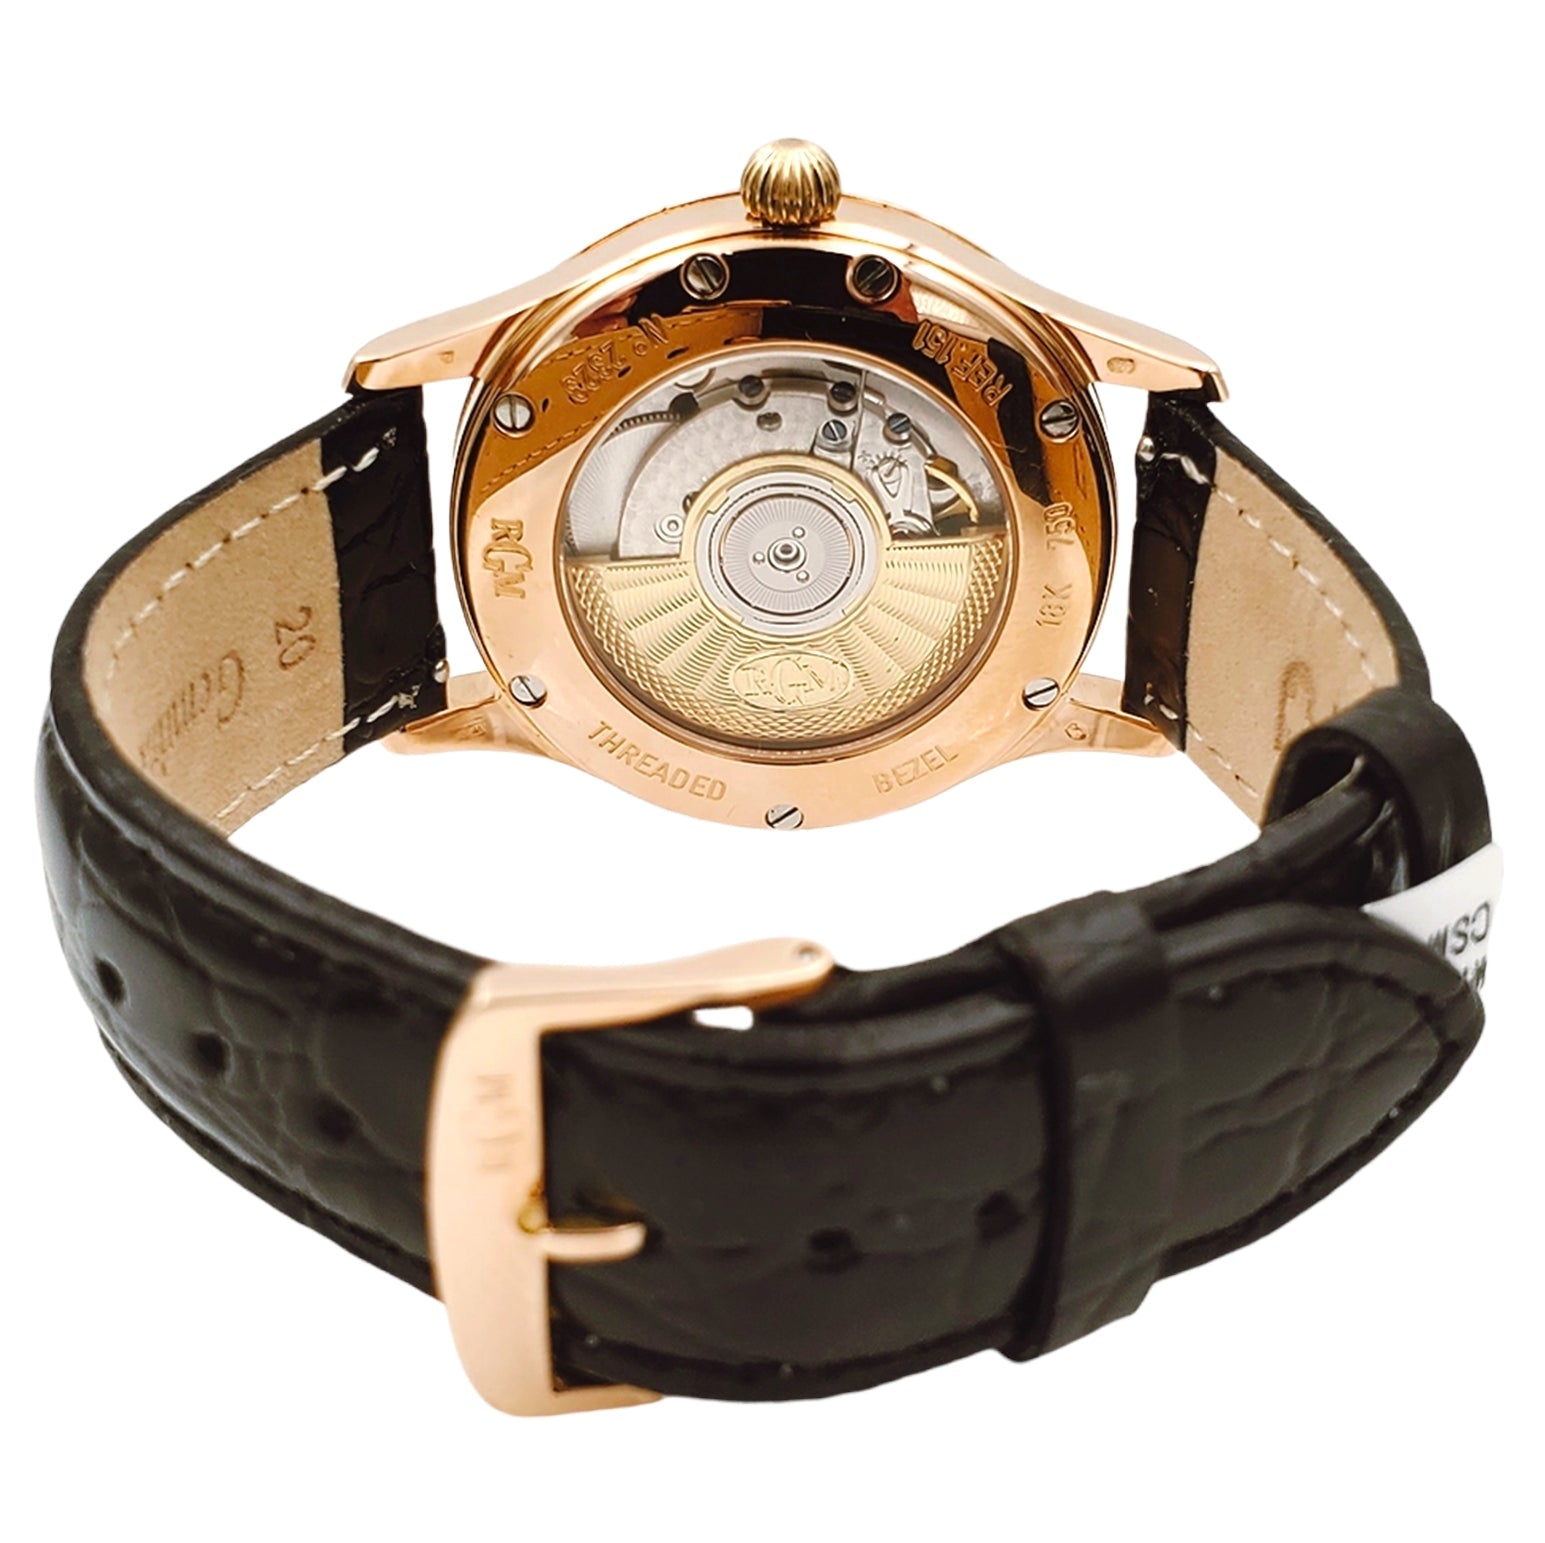 *Men's RGM 38mm - 18K Rose Gold Watch with Black Leather Band and Silver Dial. (Pre-Owned Model RGM 151-E)